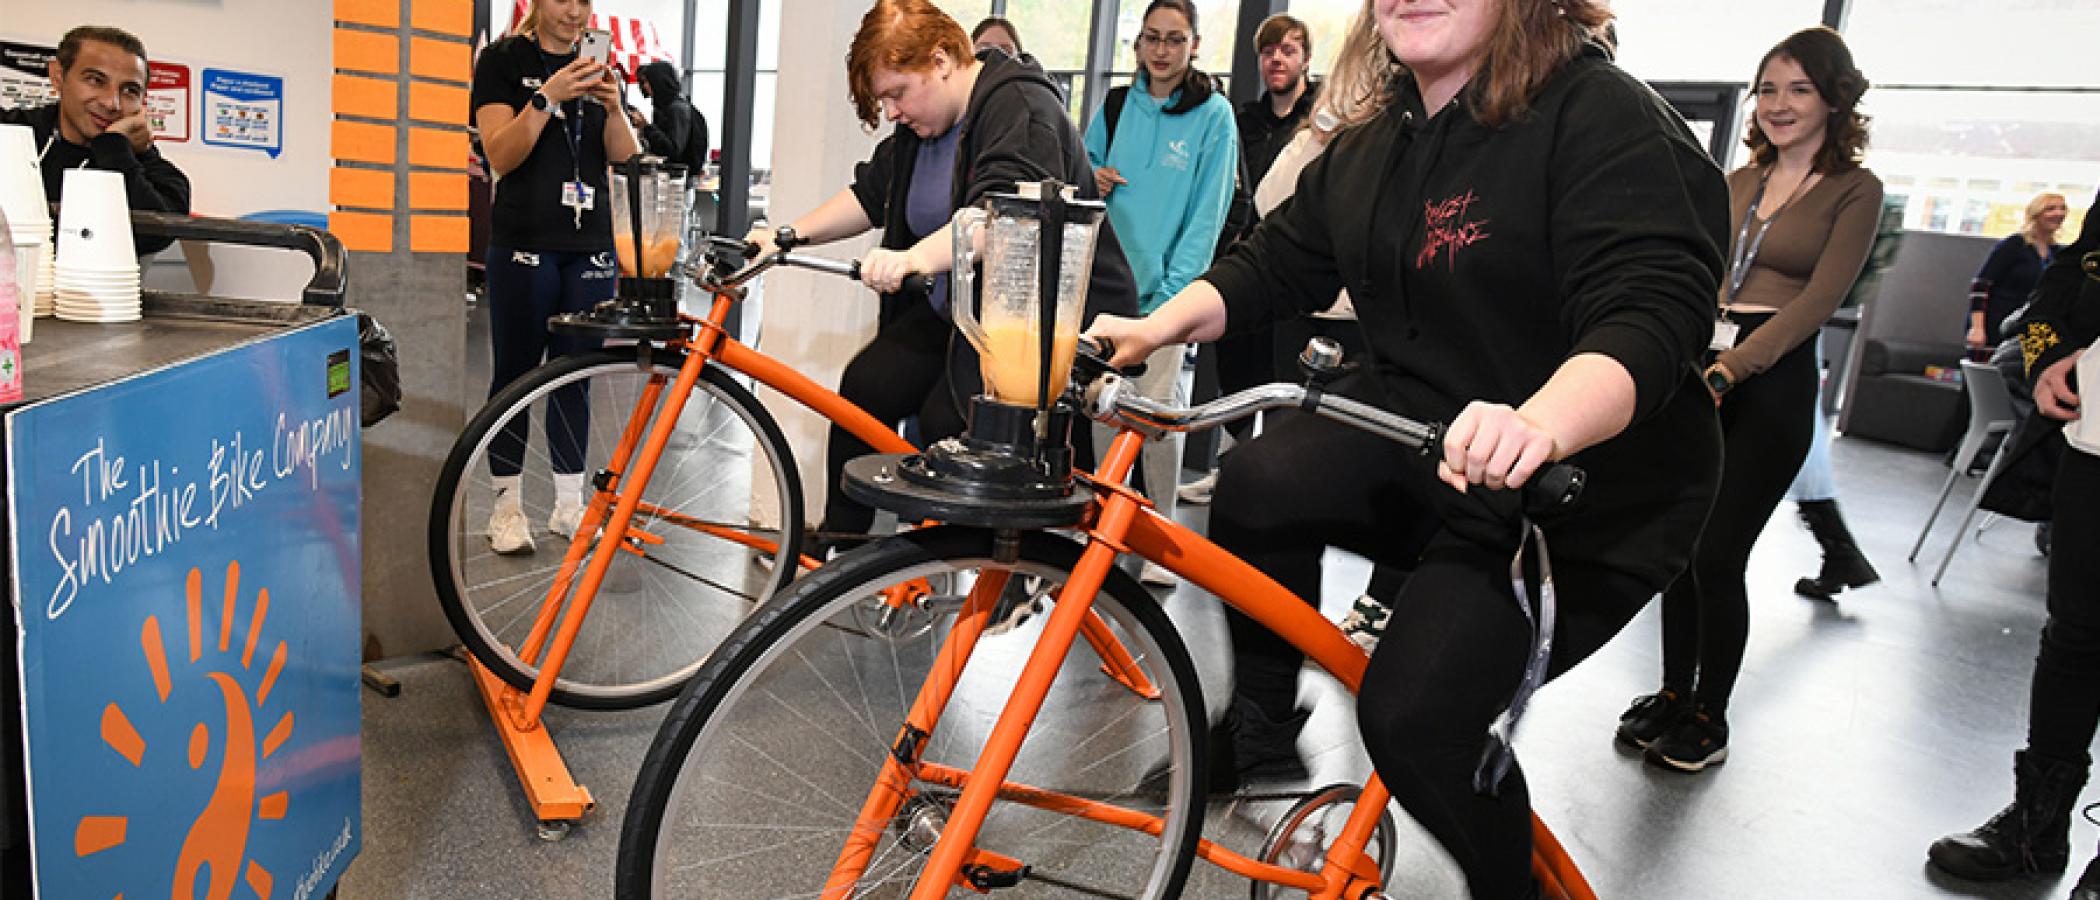 Students riding a stationary bike to blend a smoothie